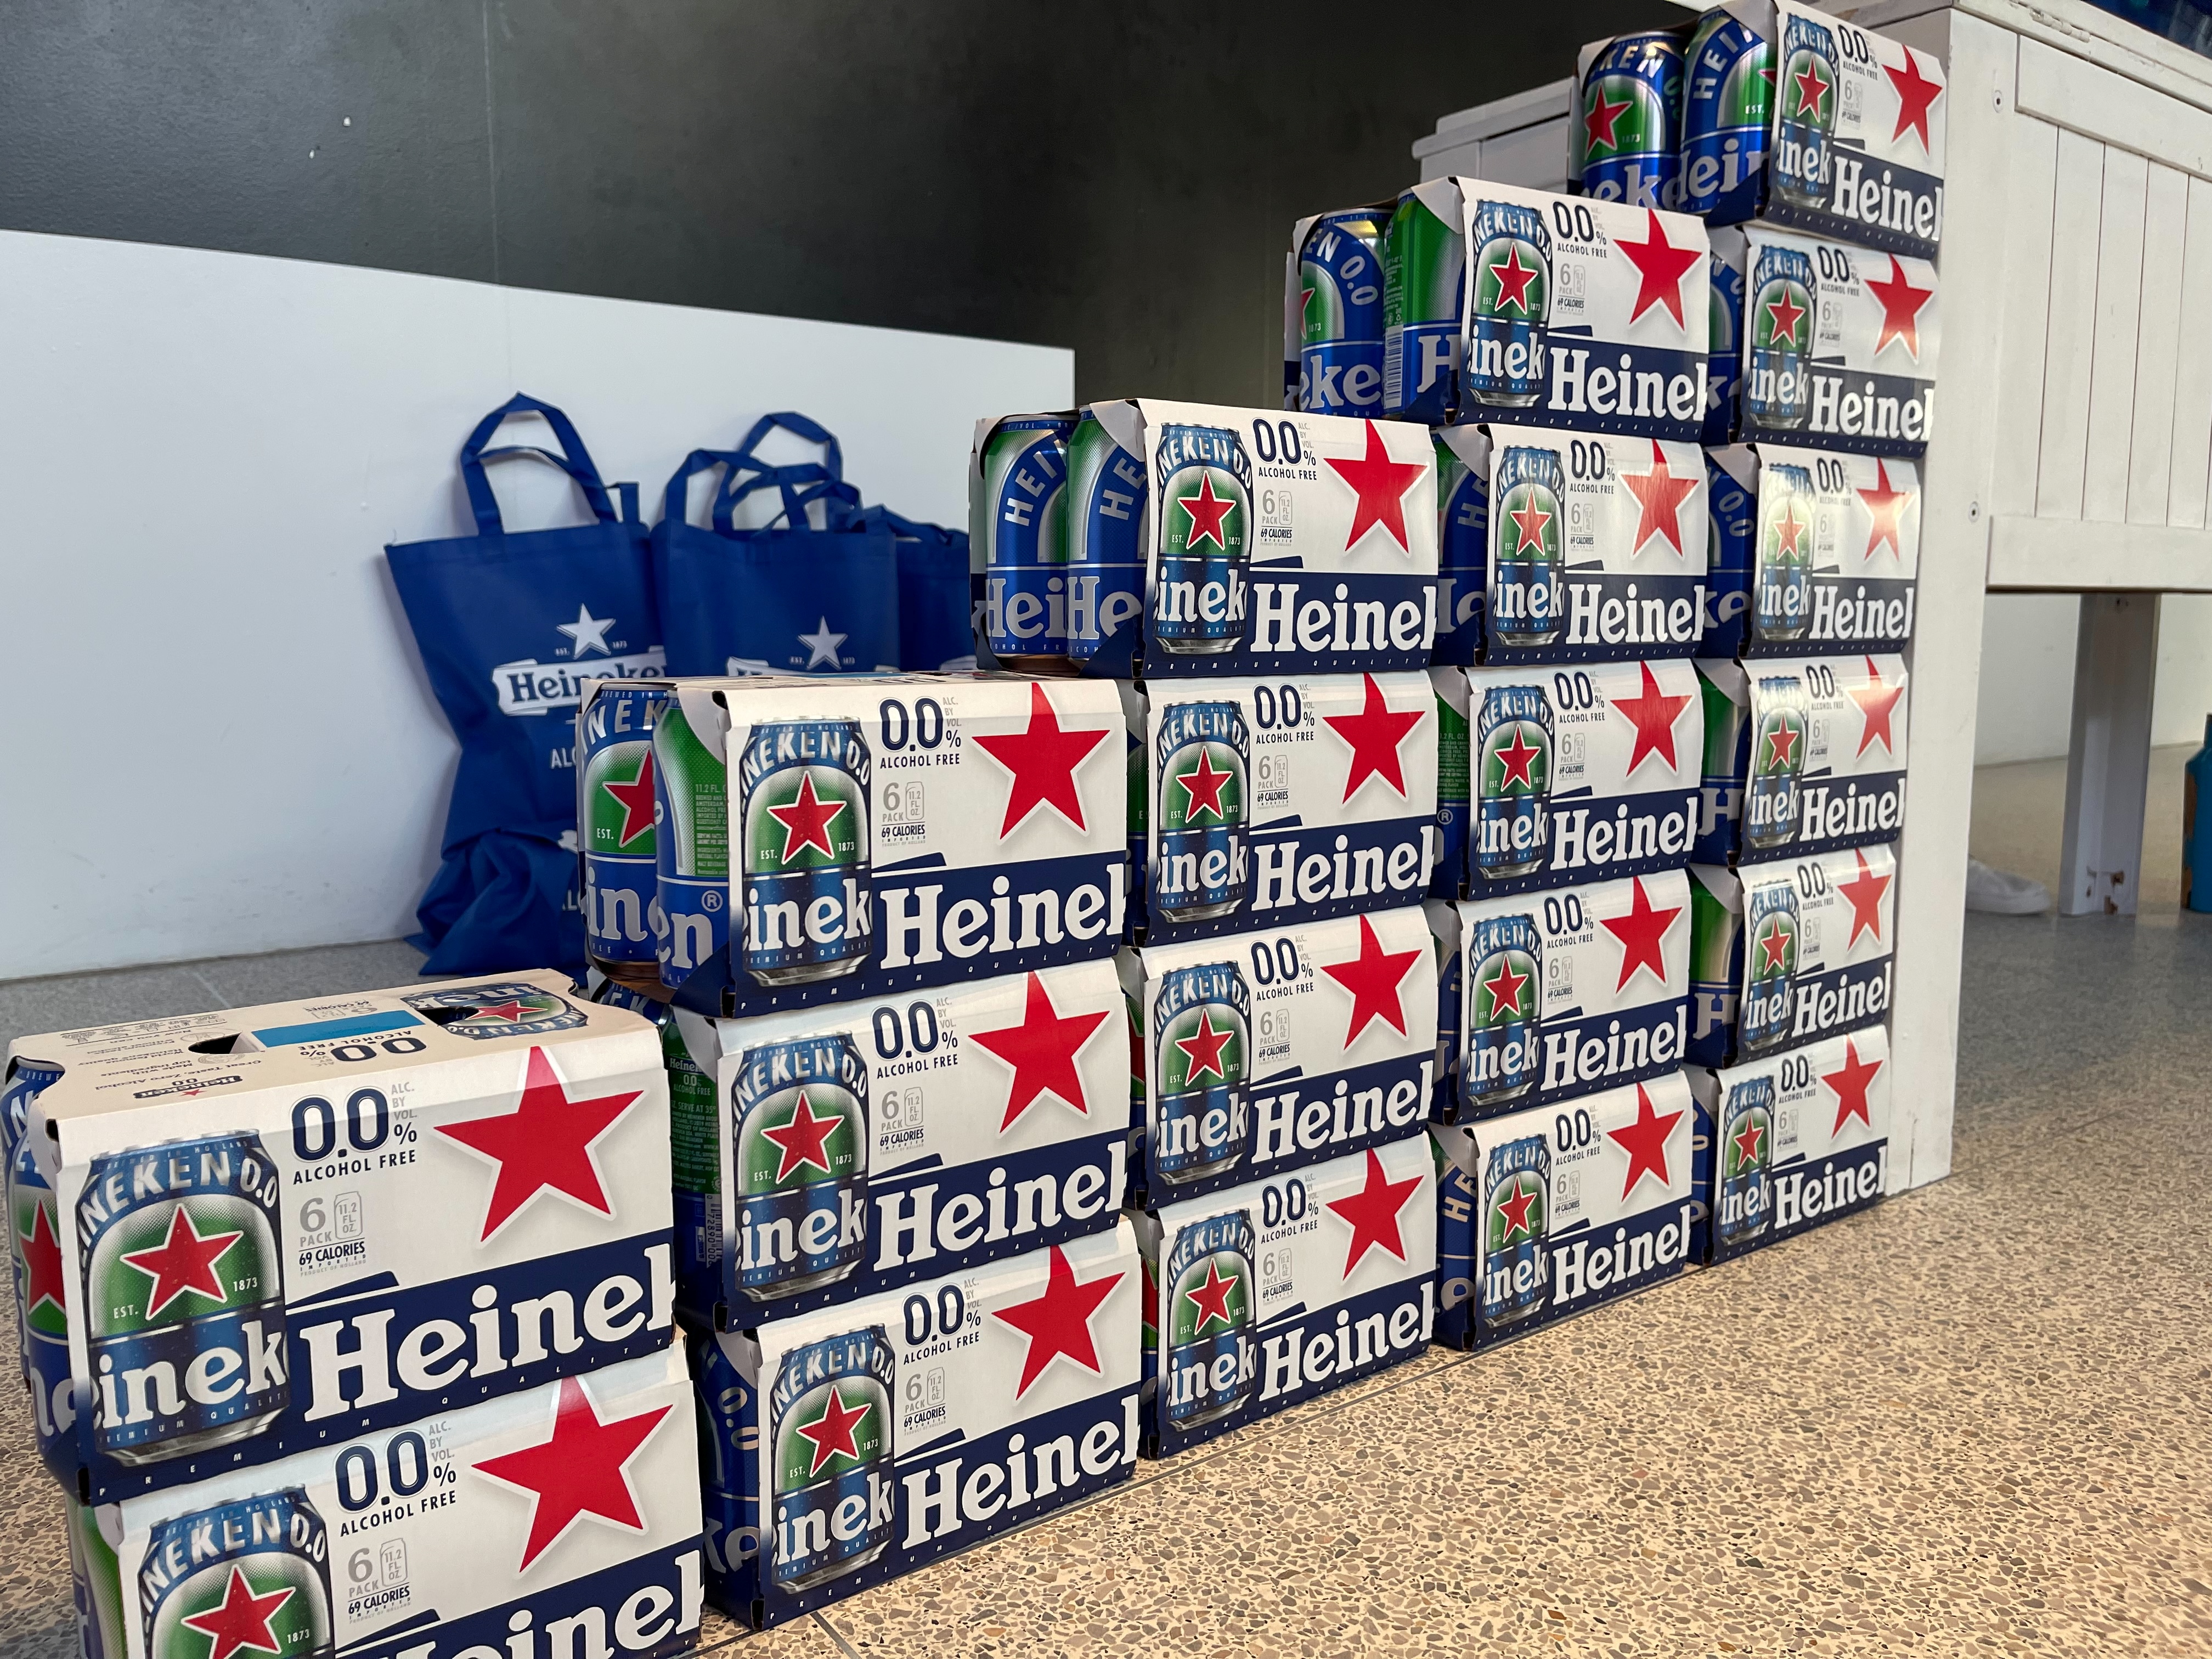 Cans of Heineken non-alcoholic beer are seen on display at a sampling event at Pier 17 in New York City's Seaport District